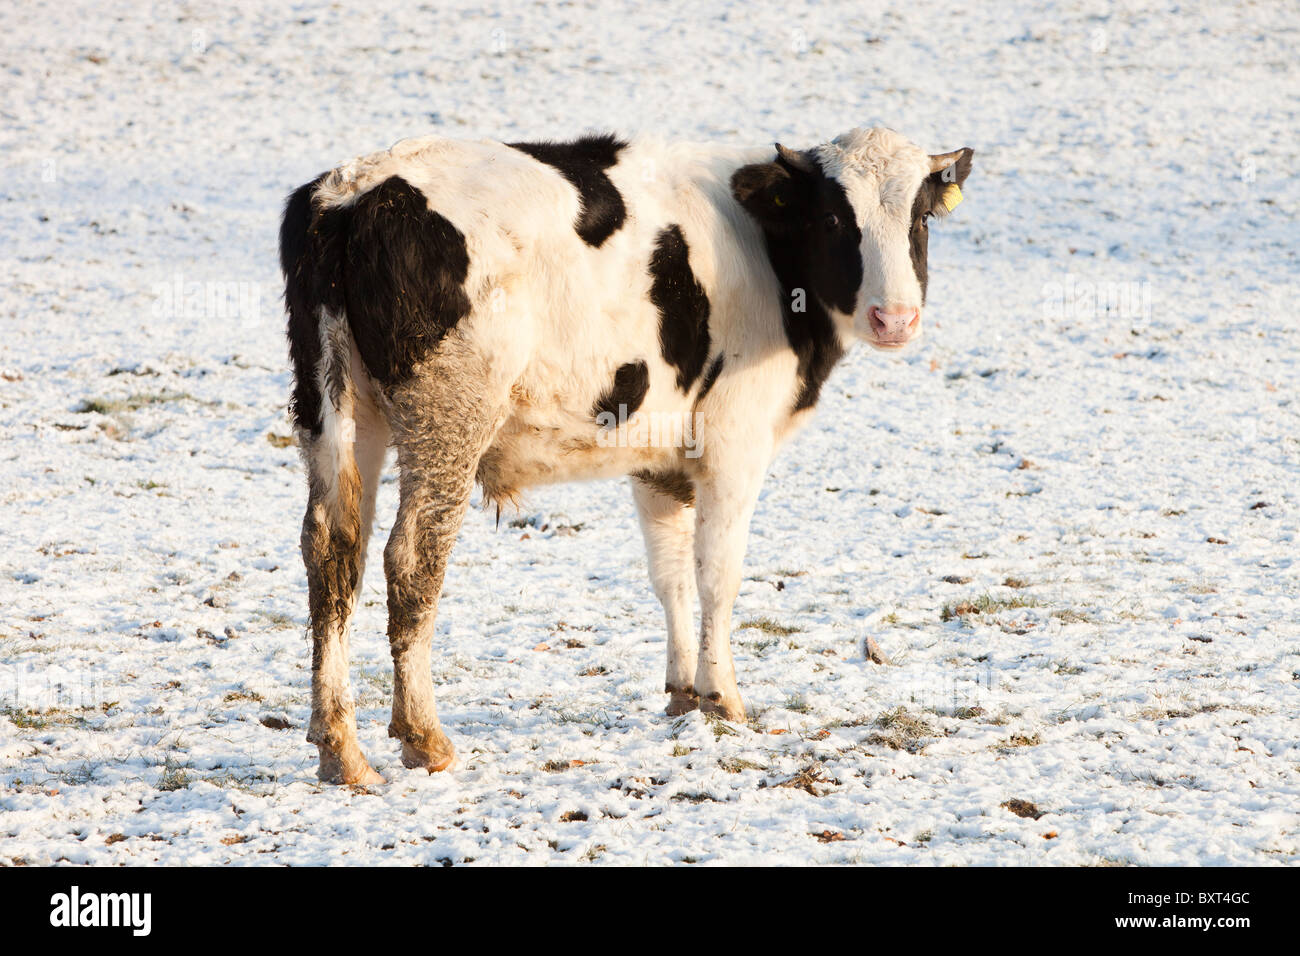 A cow in a snowy field, Leicestershire, UK. Stock Photo